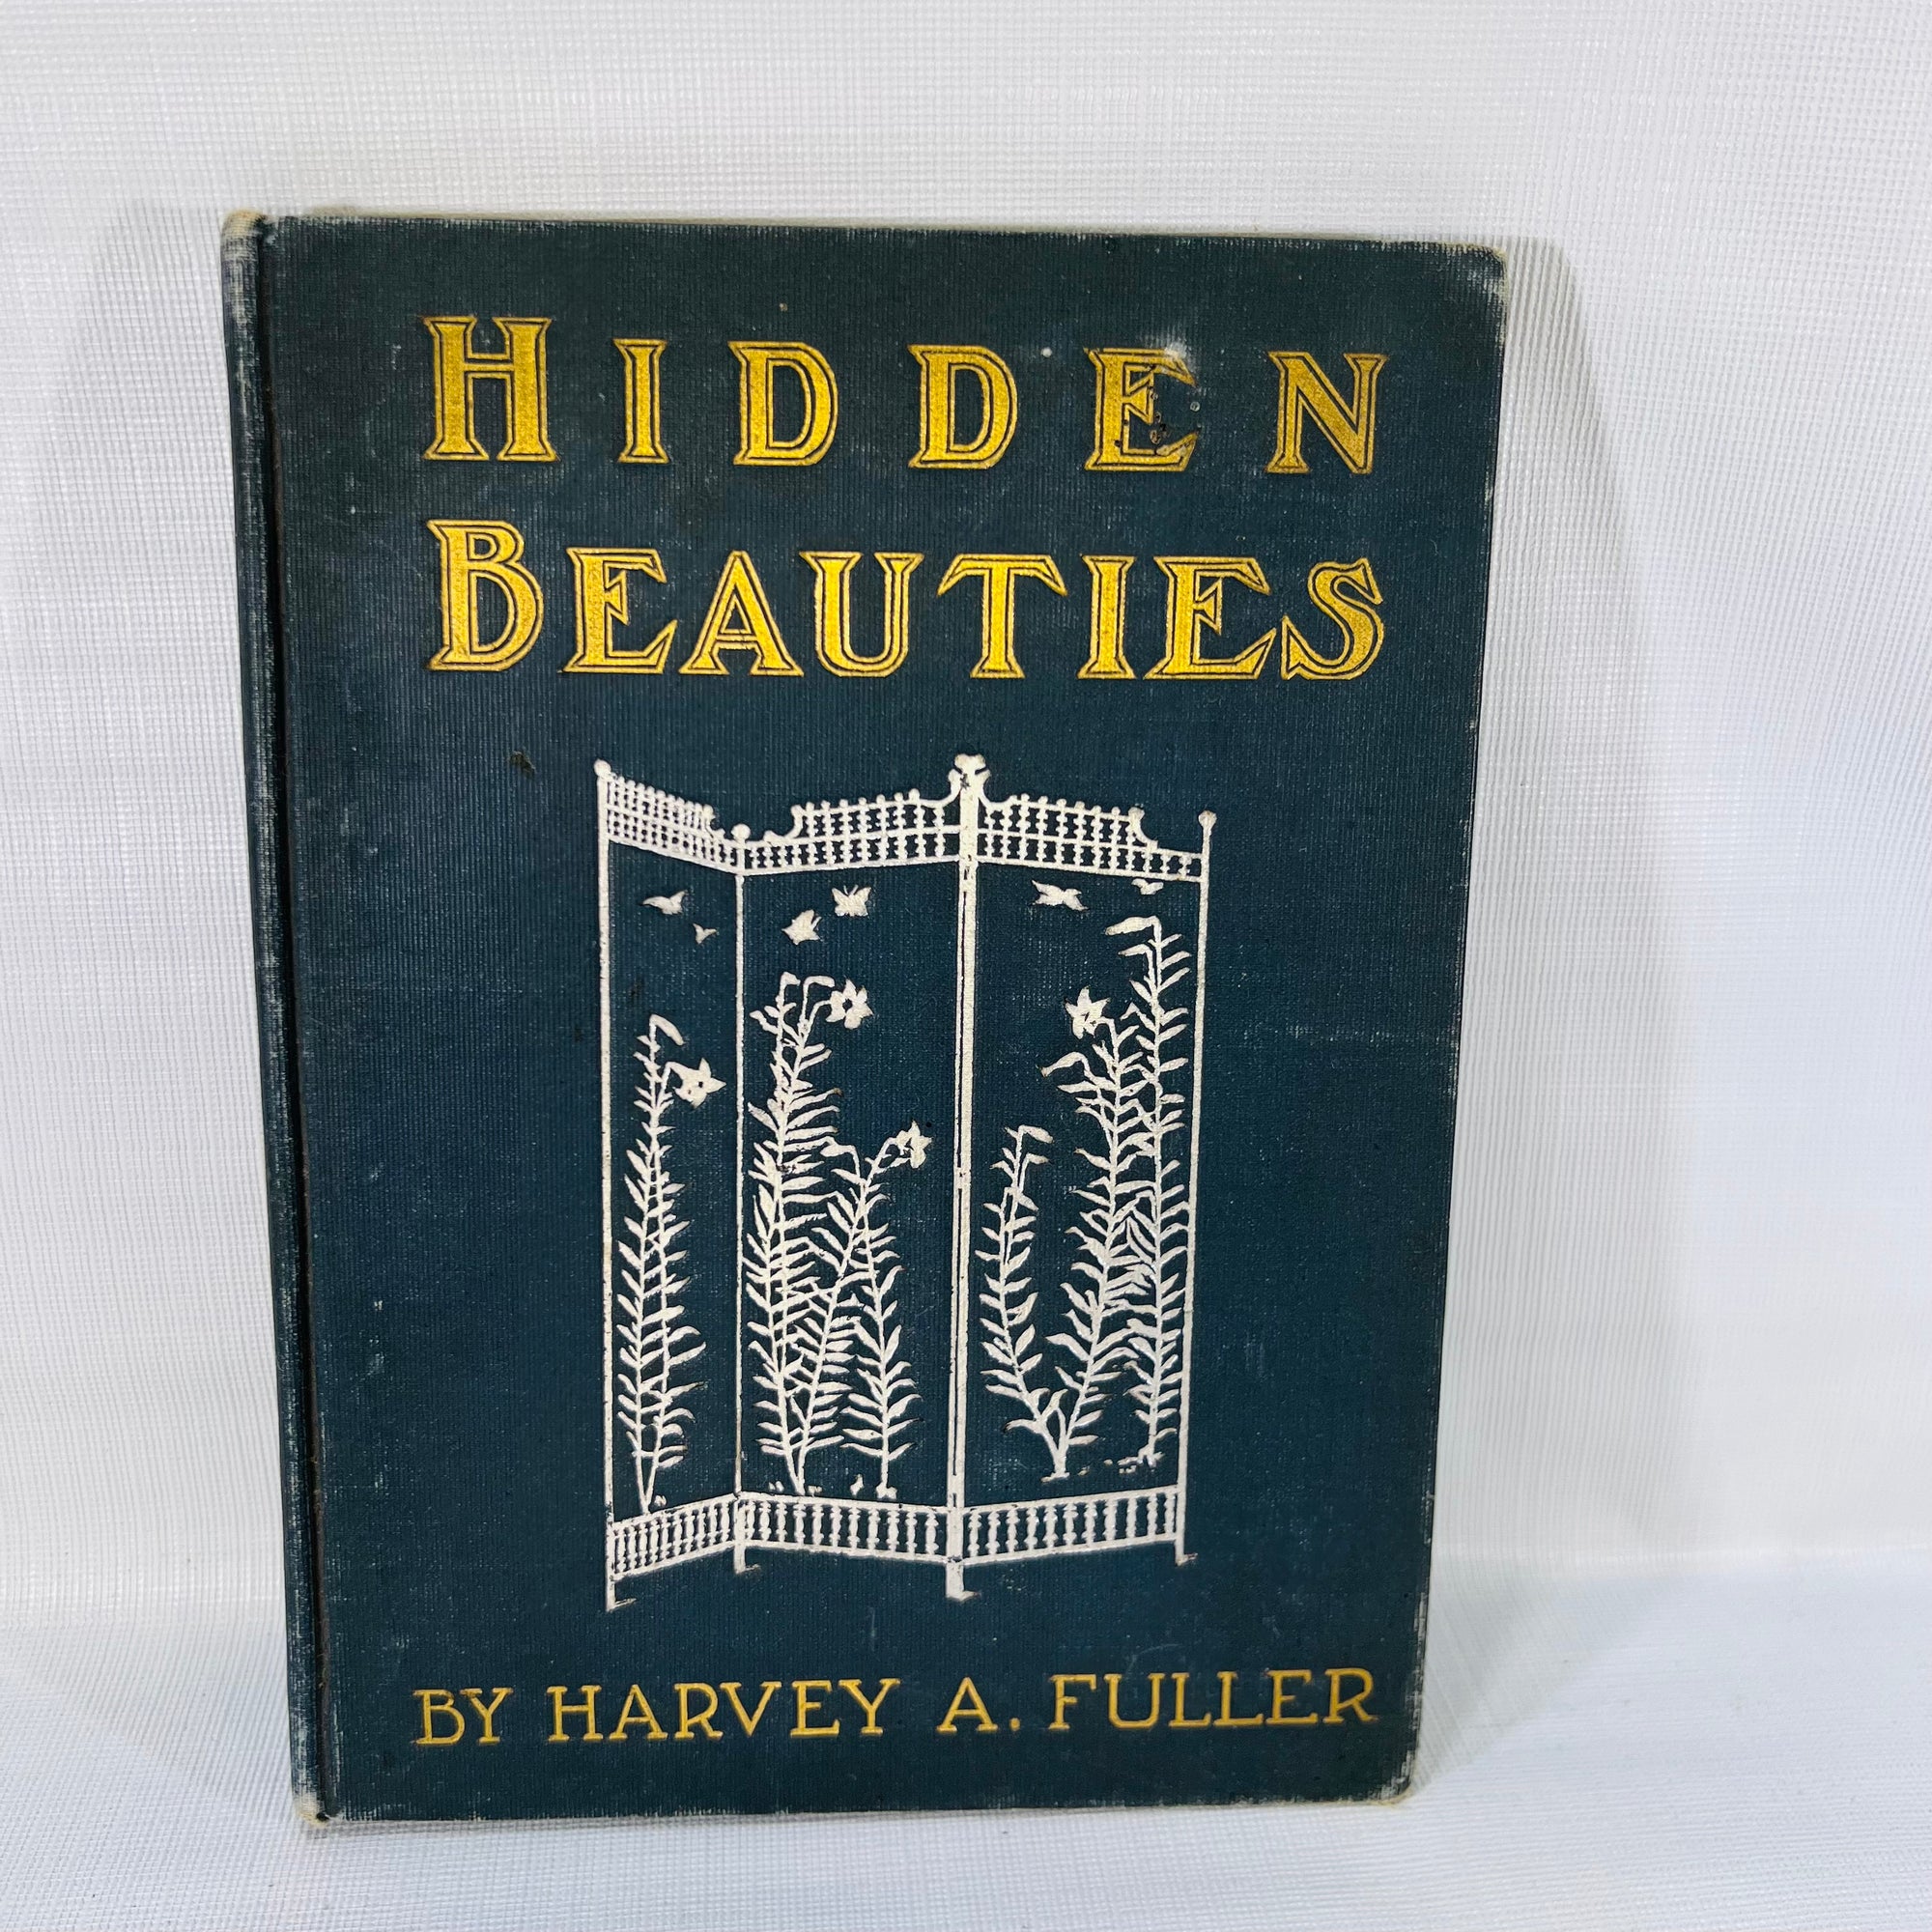 Hidden Beauties by Harvey A. Fuller 1905 Published by the Author Hillsdale Michigan Poetry Book